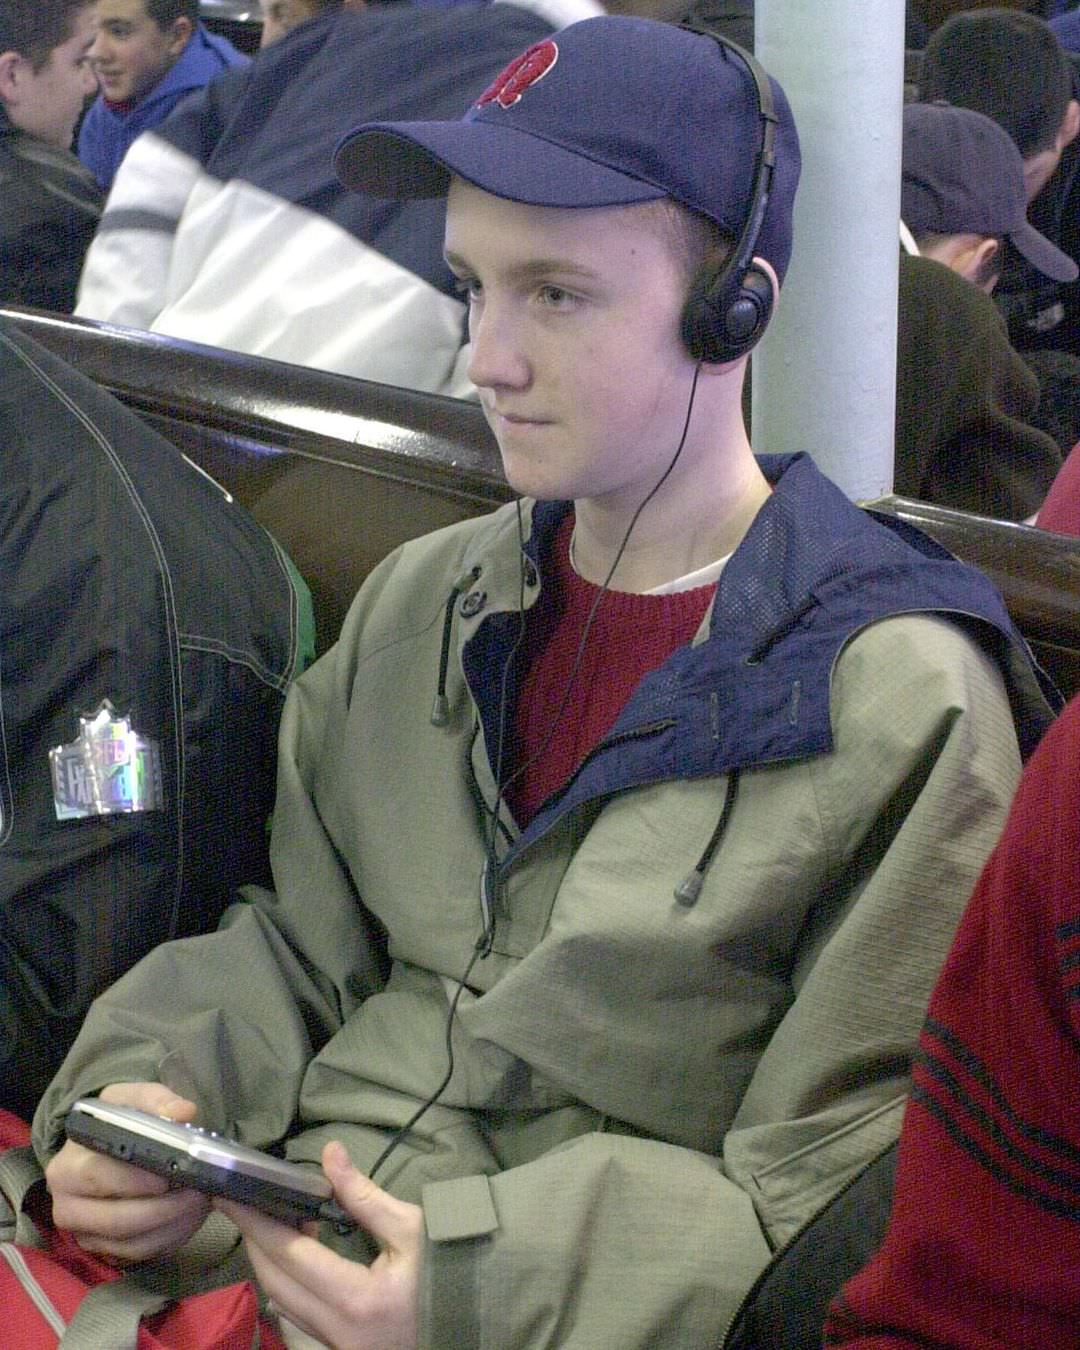 A Teen Listens To Music On A Portable Cd Player While Riding The Staten Island Ferry, 2001.